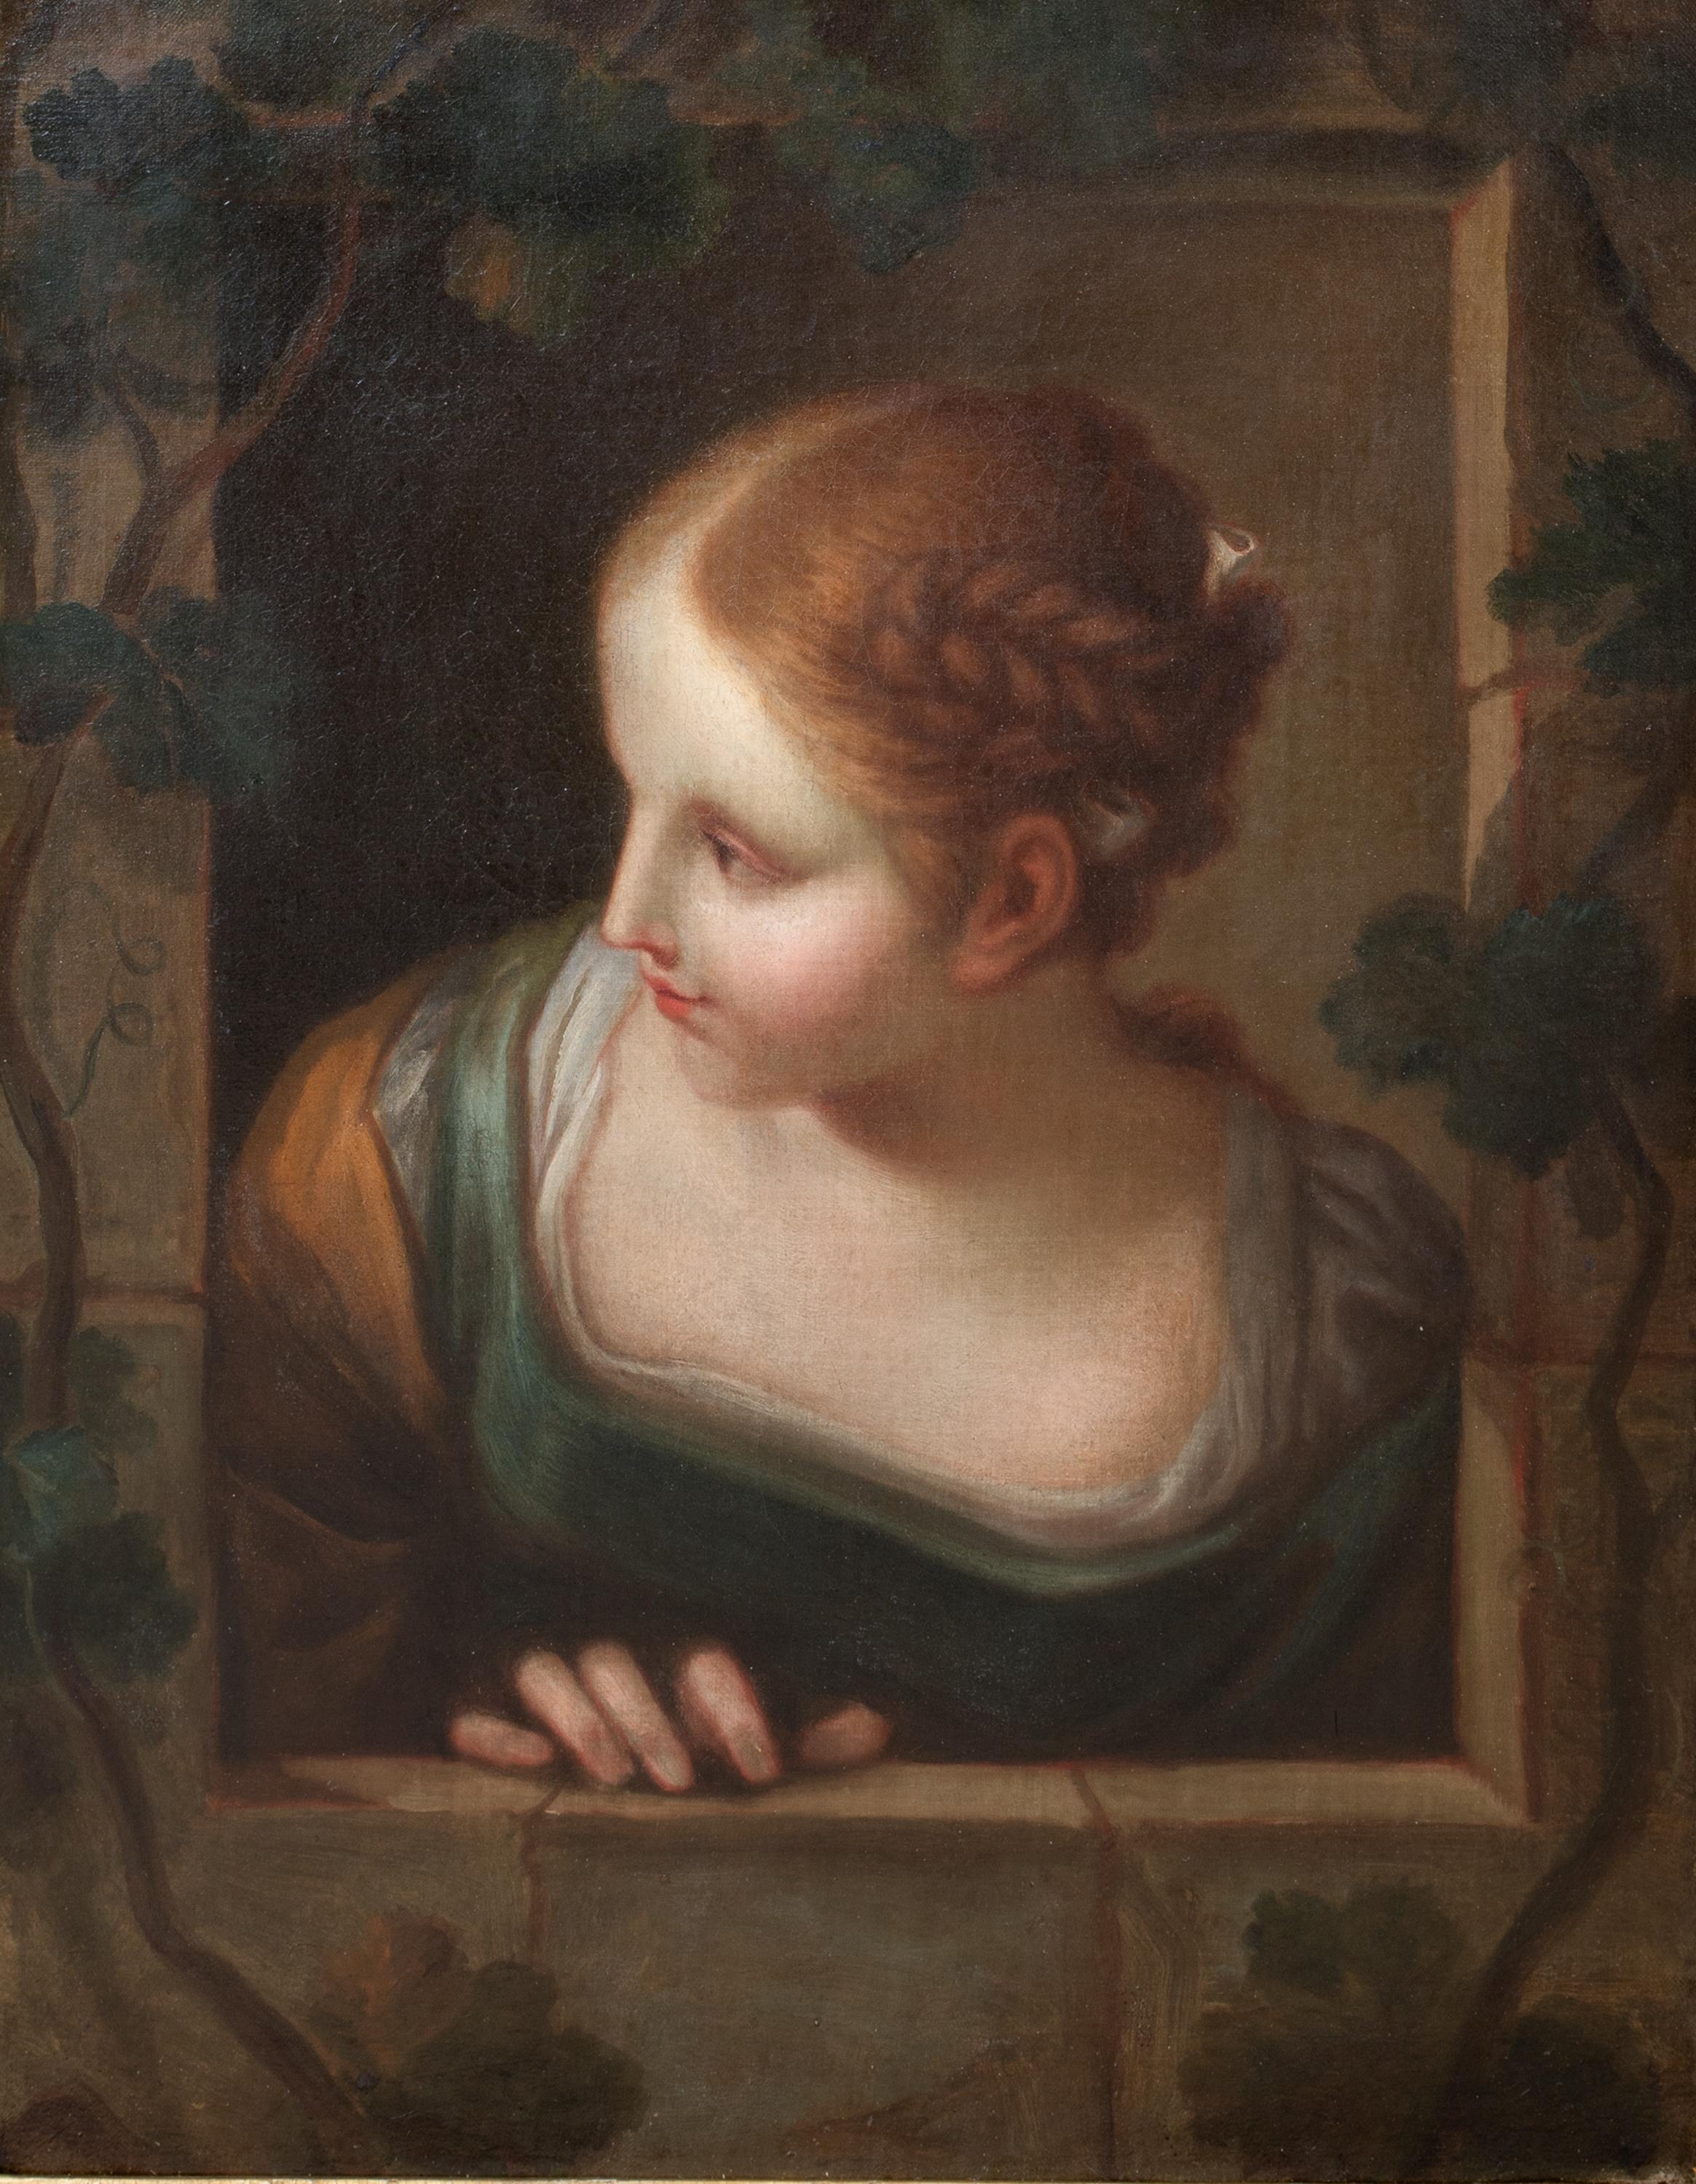 Attente, 18th Century

School of Jean-Baptiste GREUZE (1725-1805)

Large 19th Century French portrait of a young girl leaning out of a window, oil on canvas. Excellent quality and condition circa 1780 window scene of the young girl watching in